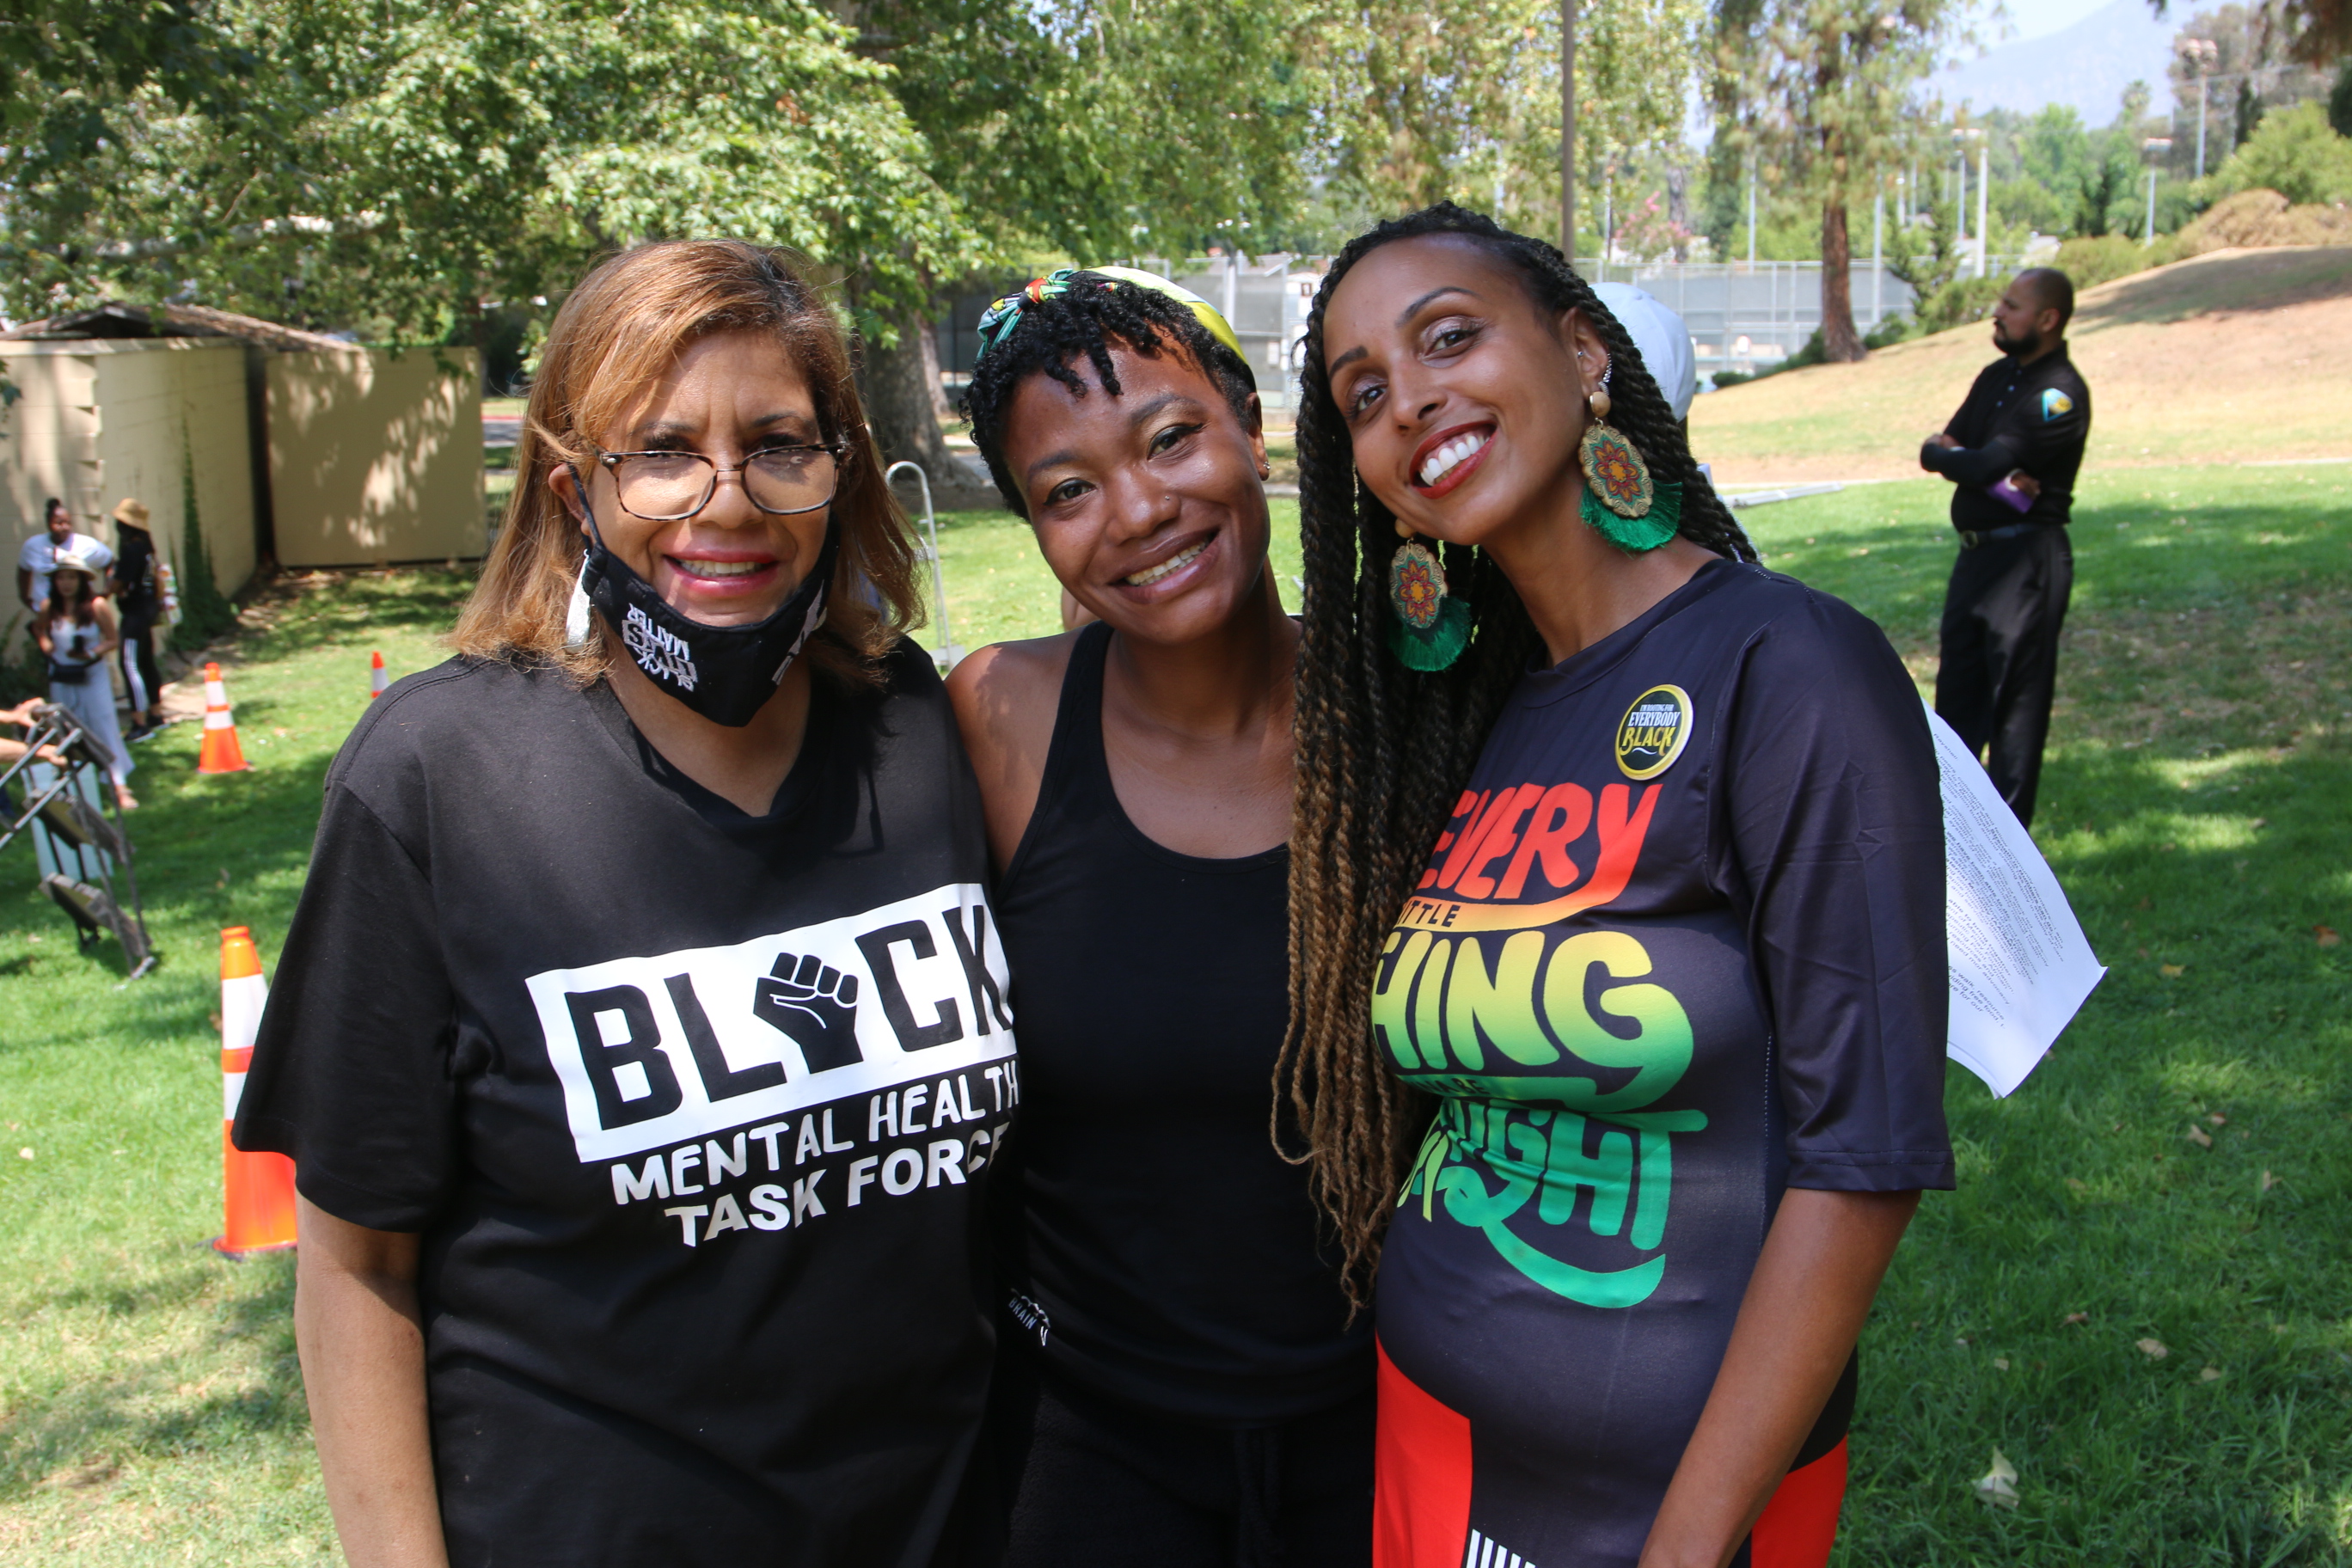 Juneteenth event at Alta Loma park with Black Mental Health Task Force